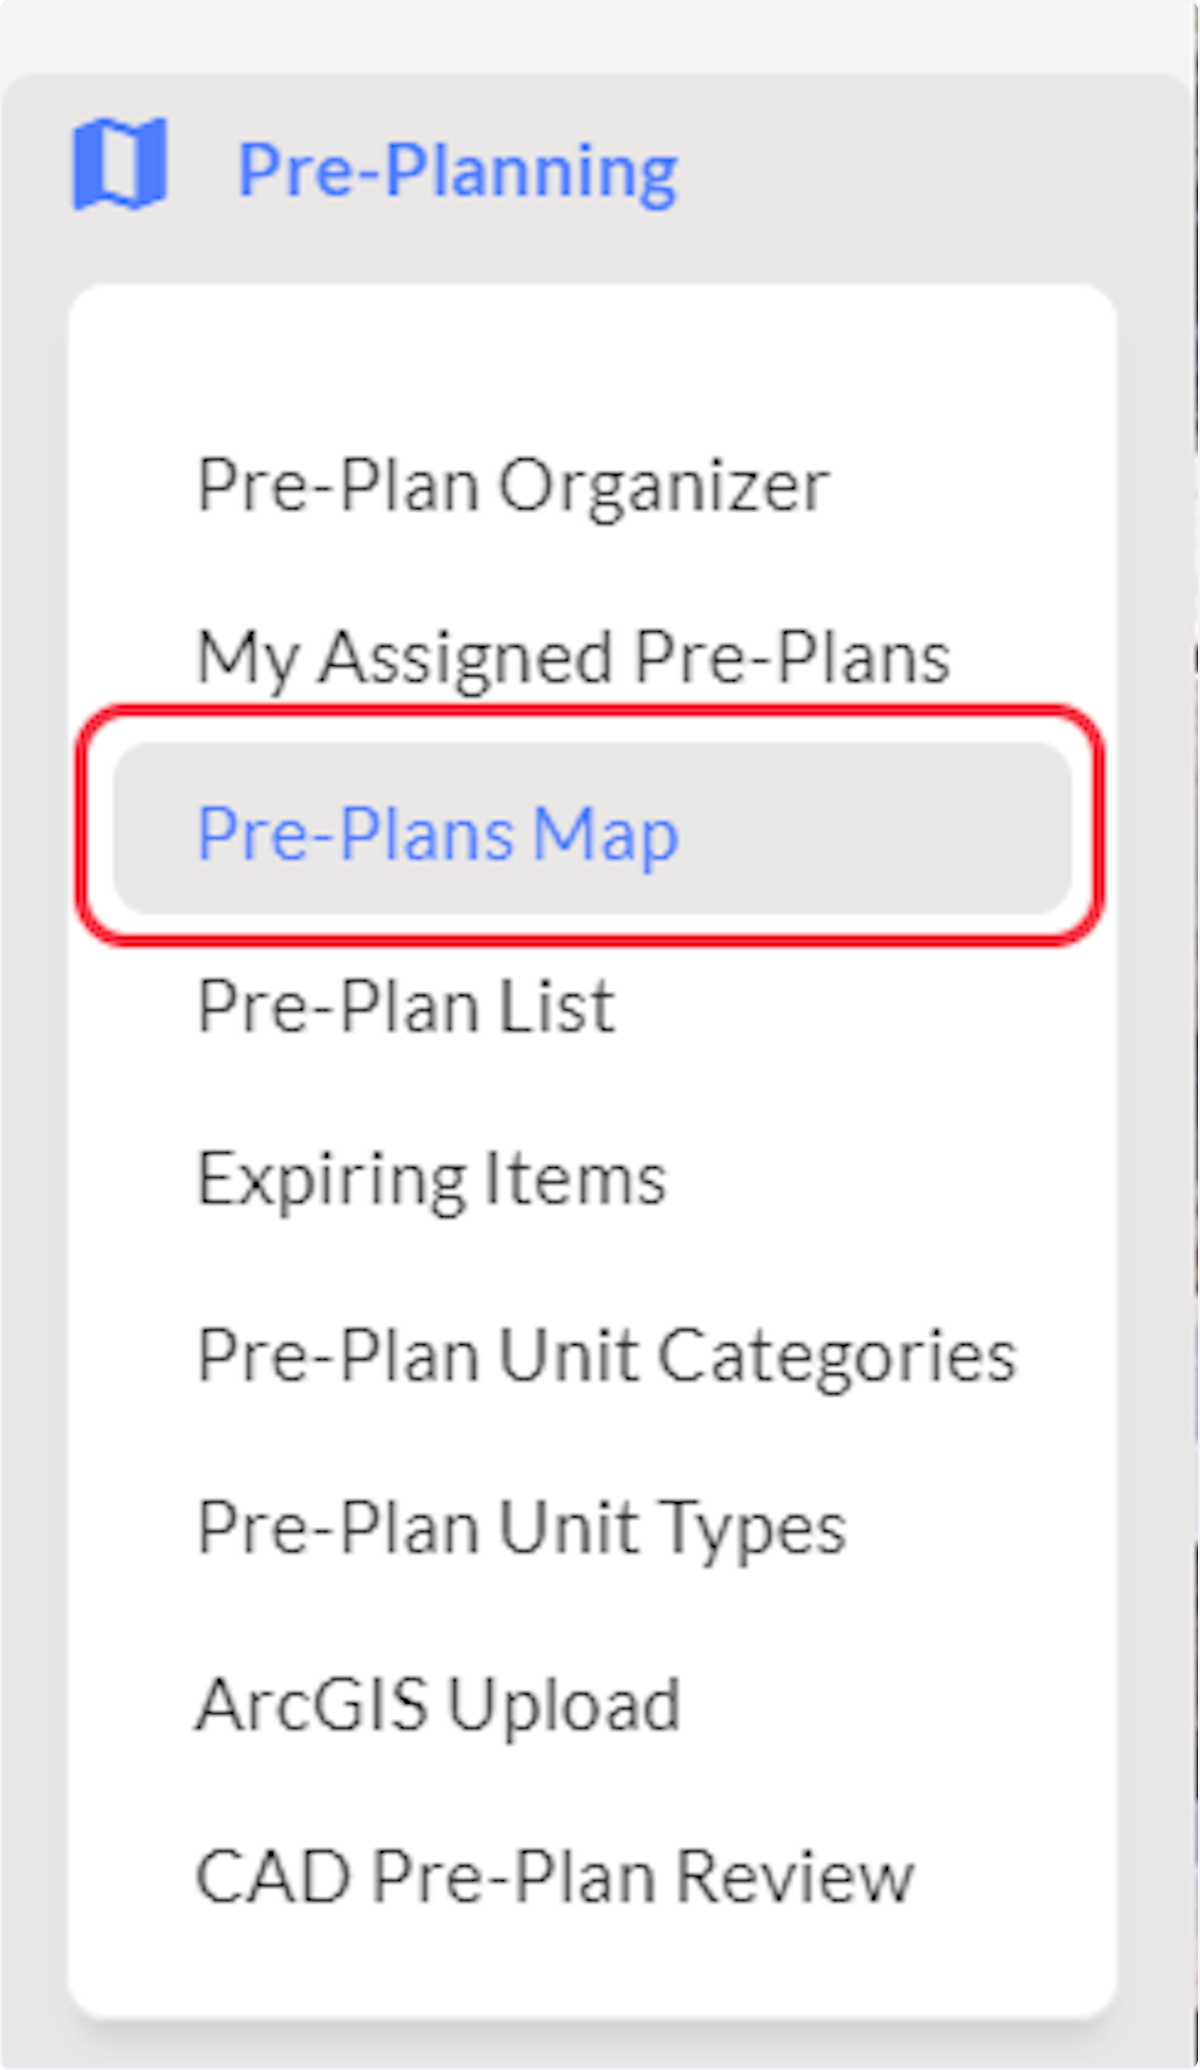 Click on Pre-Plans Map.